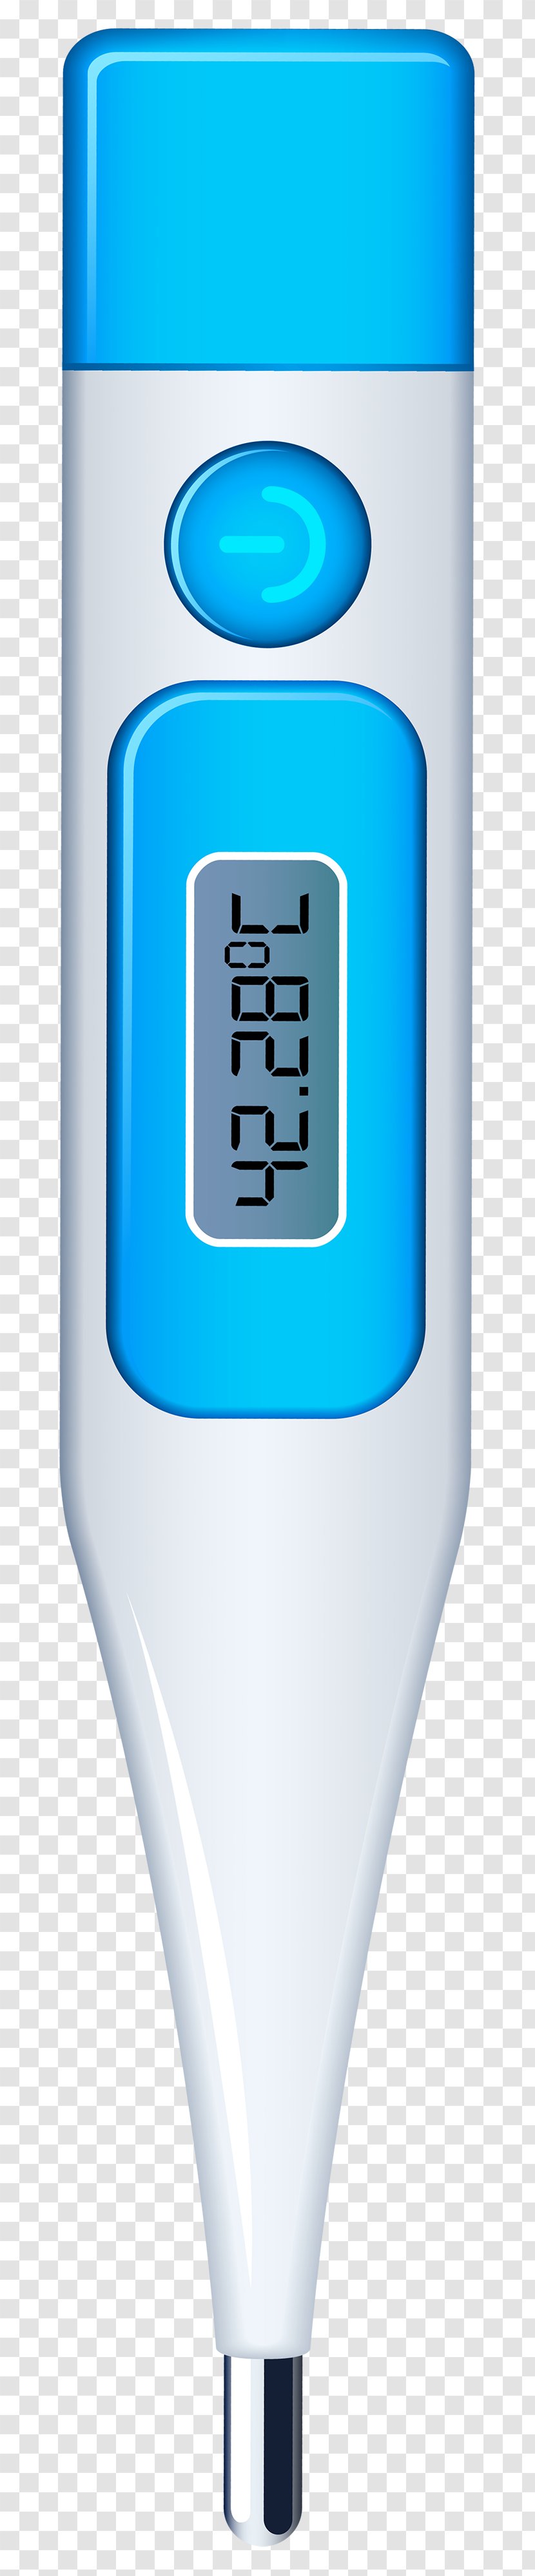 Medical Thermometers Atmospheric Thermometer Clip Art - Electric Blue Transparent PNG